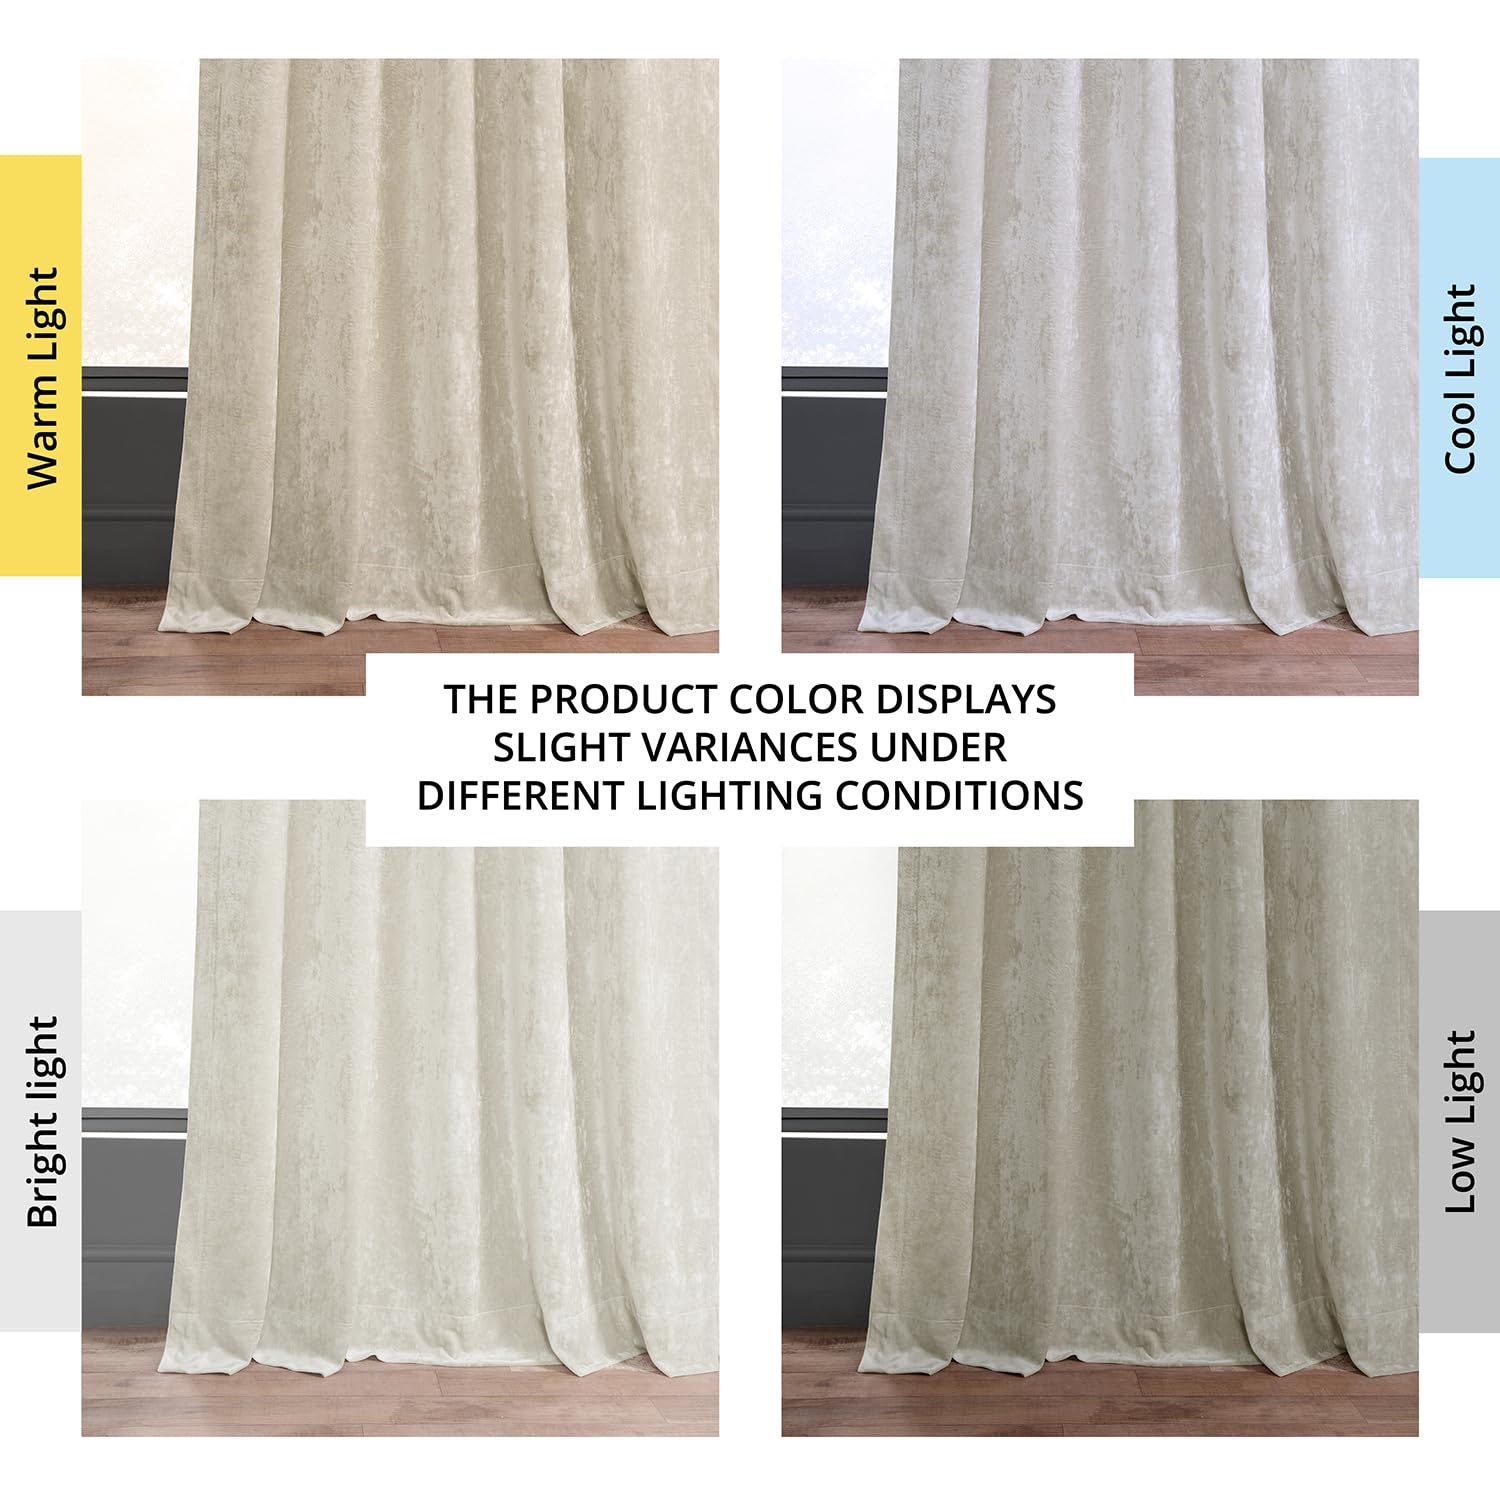 HPD Half Price Drapes Lush Crush Velvet Curtains - Room Darkening Curtain 84 Inches Long for Bedroom & Living Room, Luxury Look, Rod Pocket Design, (1 Panel), 50W x 84L, Champagne